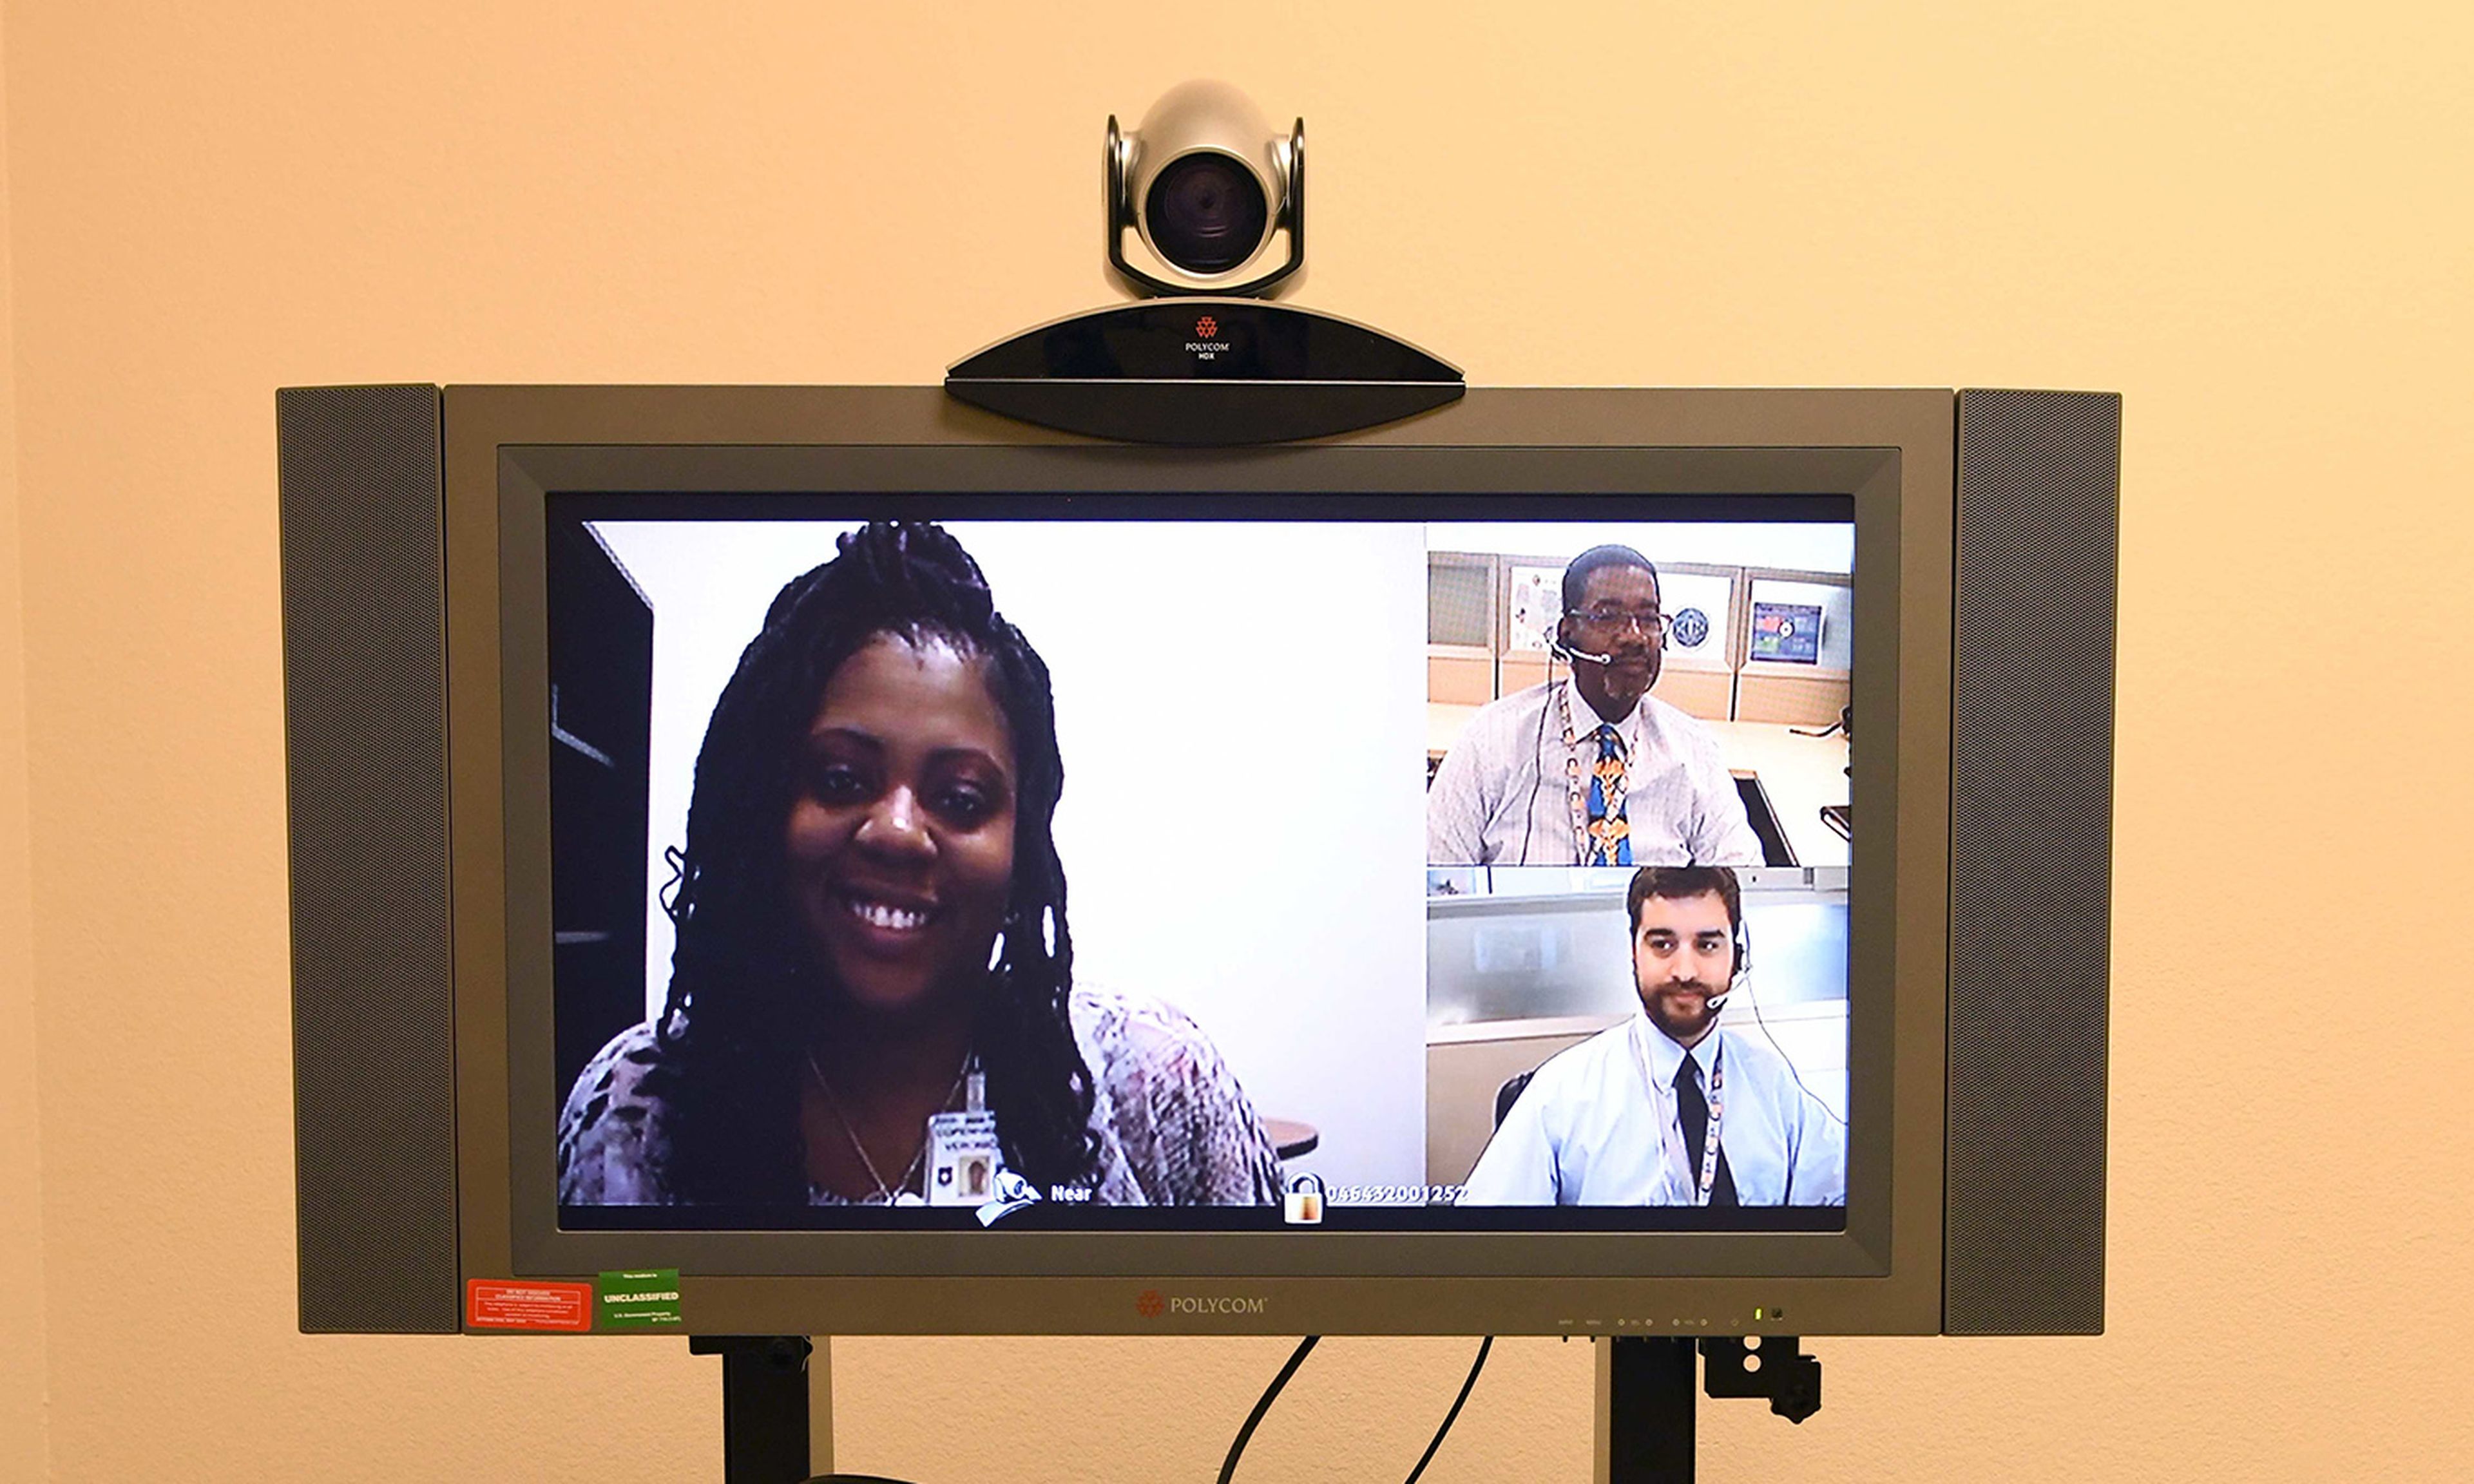 Audio-only telehealth is crucial to reaching patients in underserved communities. New OCR guidance aims to support providers with providing those healthcare services, while complying with HIPAA. Pictured: Members contributing to telemedicine test its capabilities at Minot Air Force Base, N.D., on July 8, 2019. (Senior Airman Dillon J. Audit/Air For...